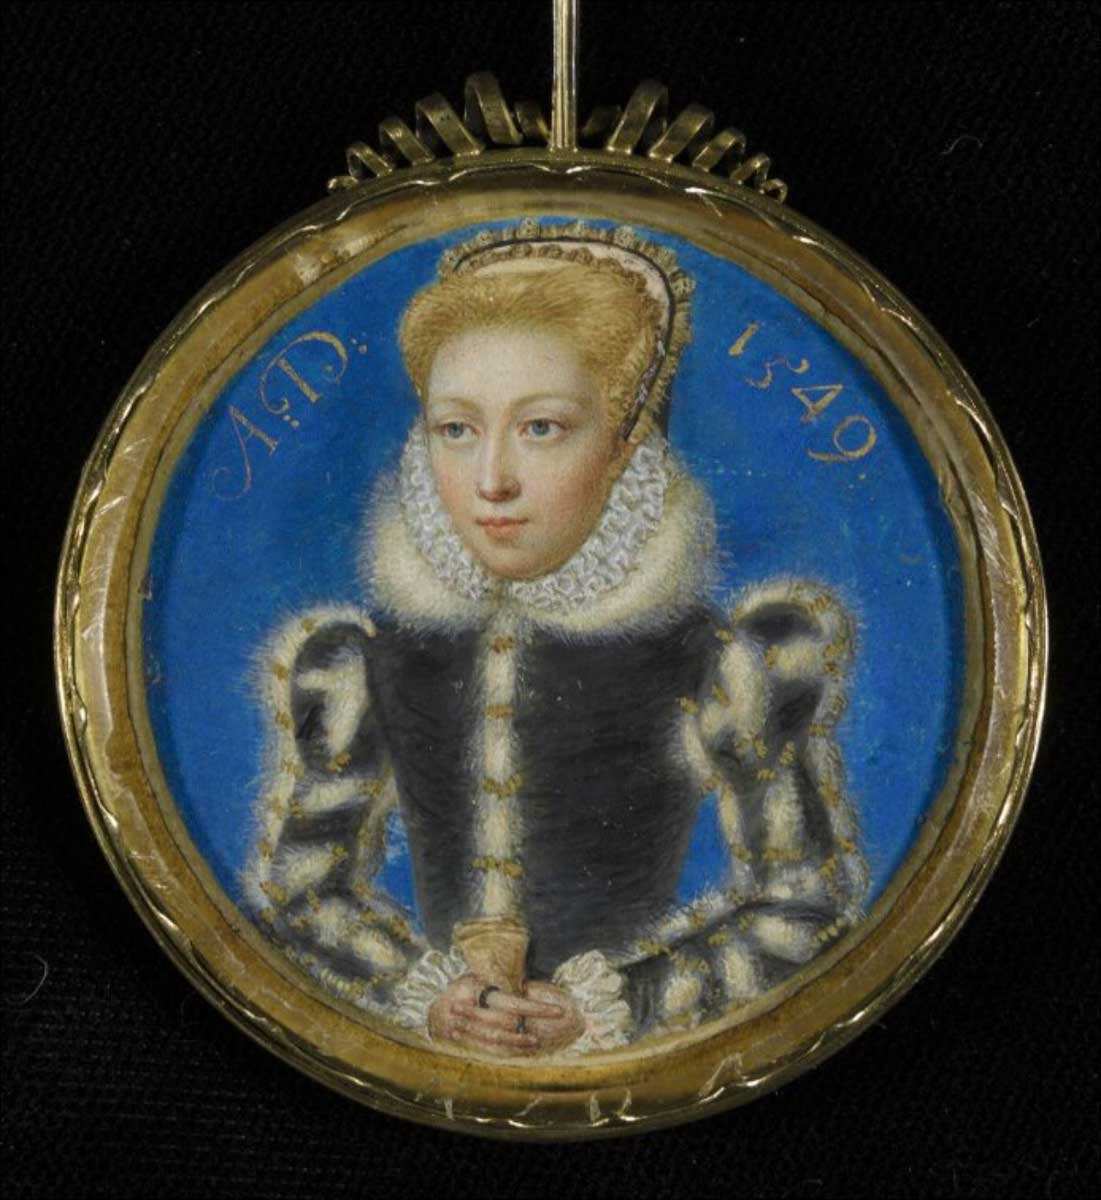 Levina Teerlinc A Girl Formerly Thought to be Queen Elizabeth I as Princess Portrait Miniature 1549